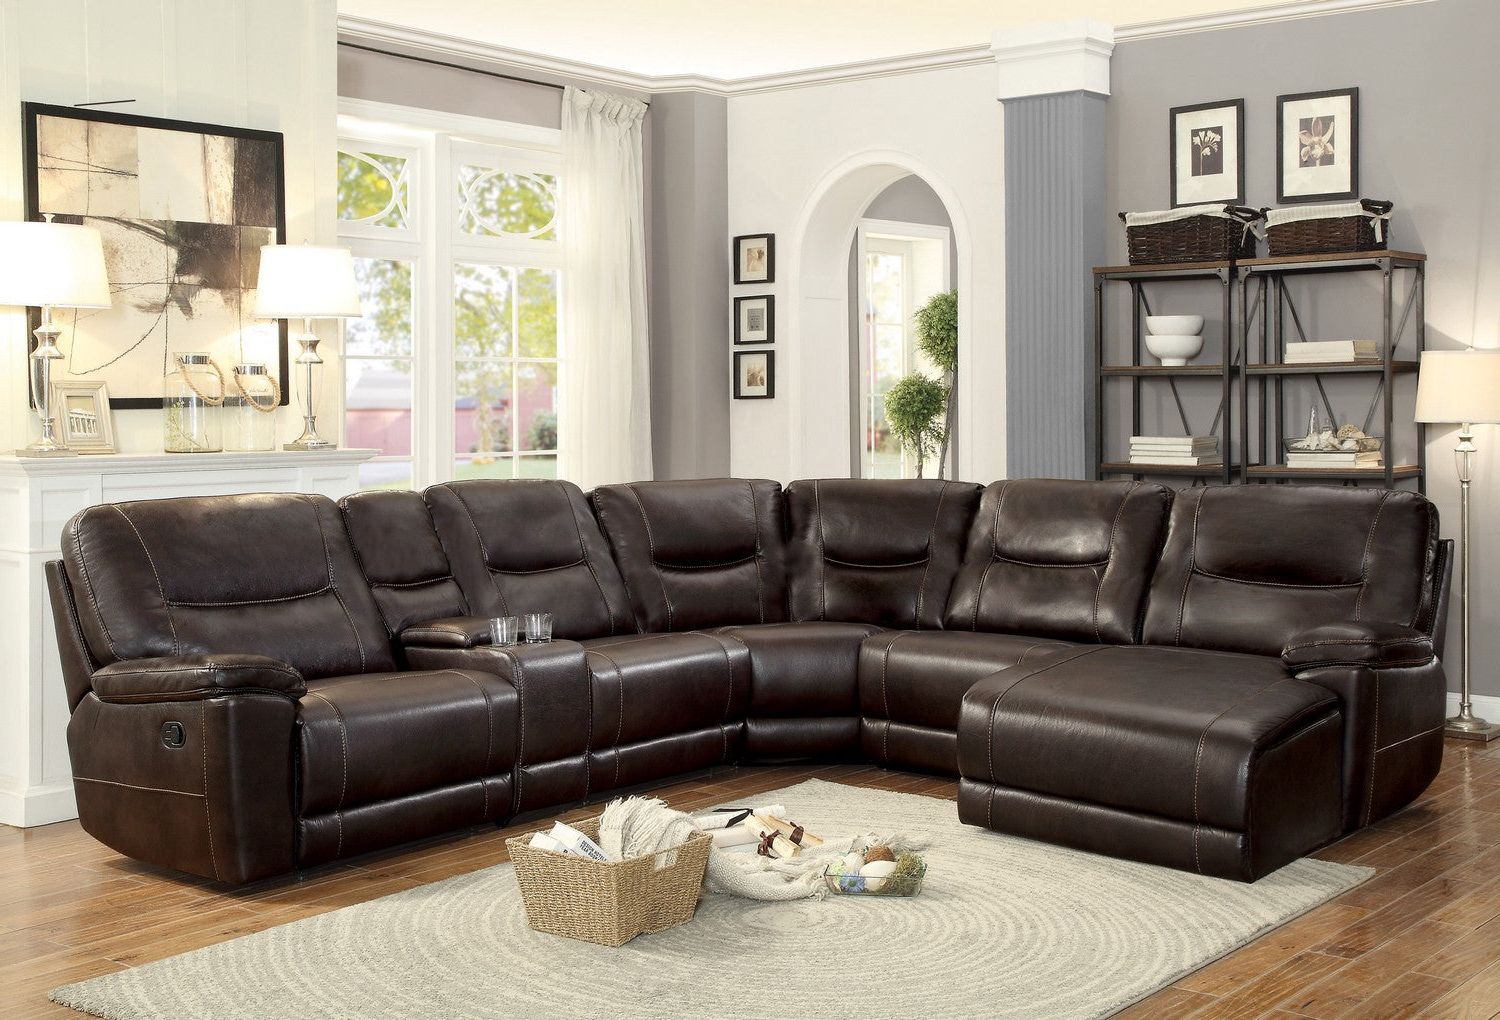 Camel Brown Leather 3 Piece Sectional Sofa Sierra – Having Removable Regarding 3 Piece Leather Sectional Sofa Sets (View 16 of 20)